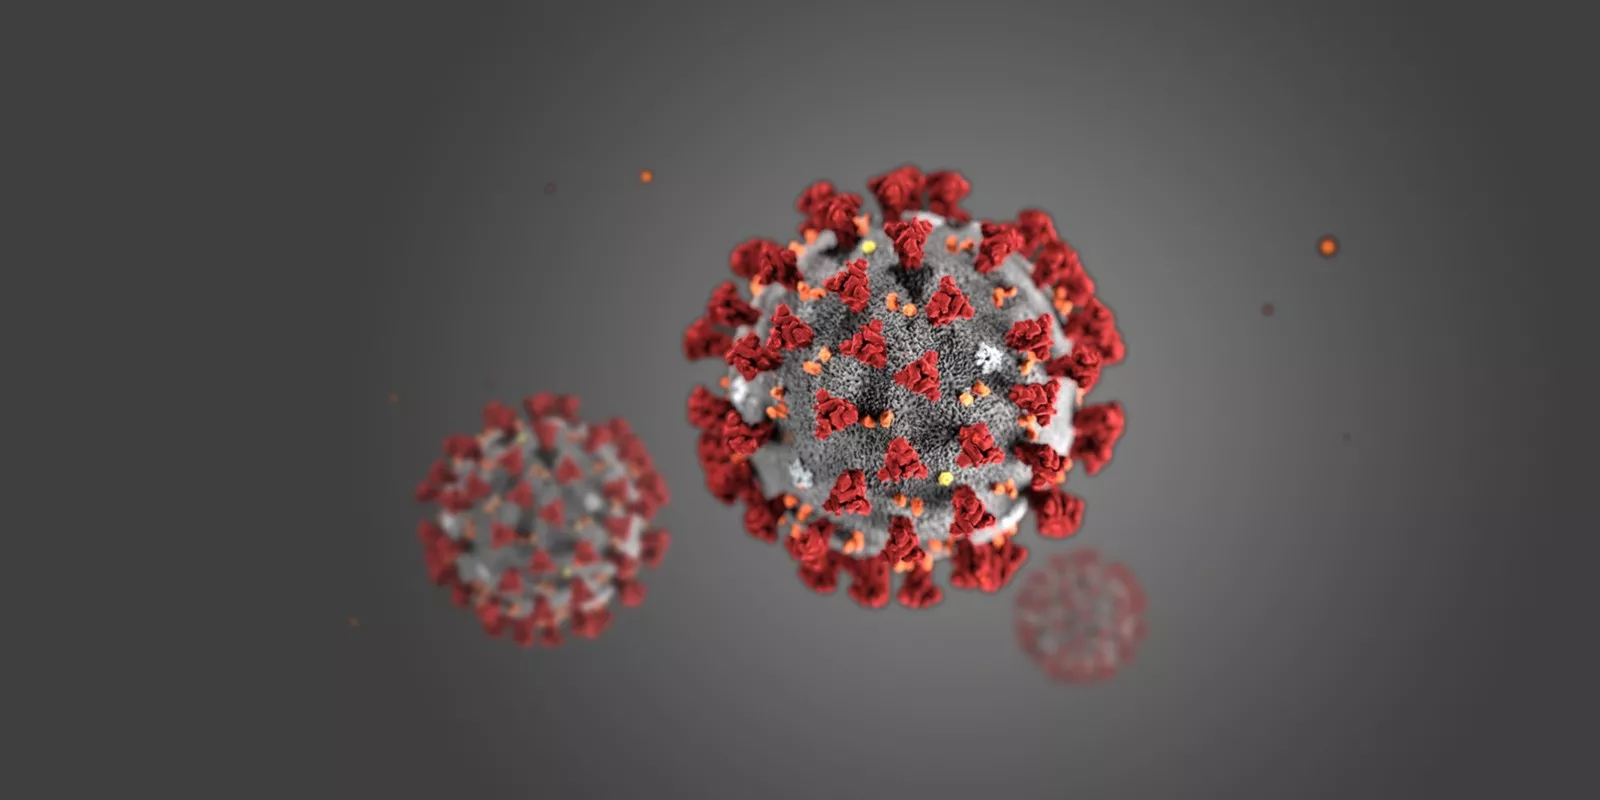 Illustration: Coronavirus (Centers for Disease Control and Prevention)